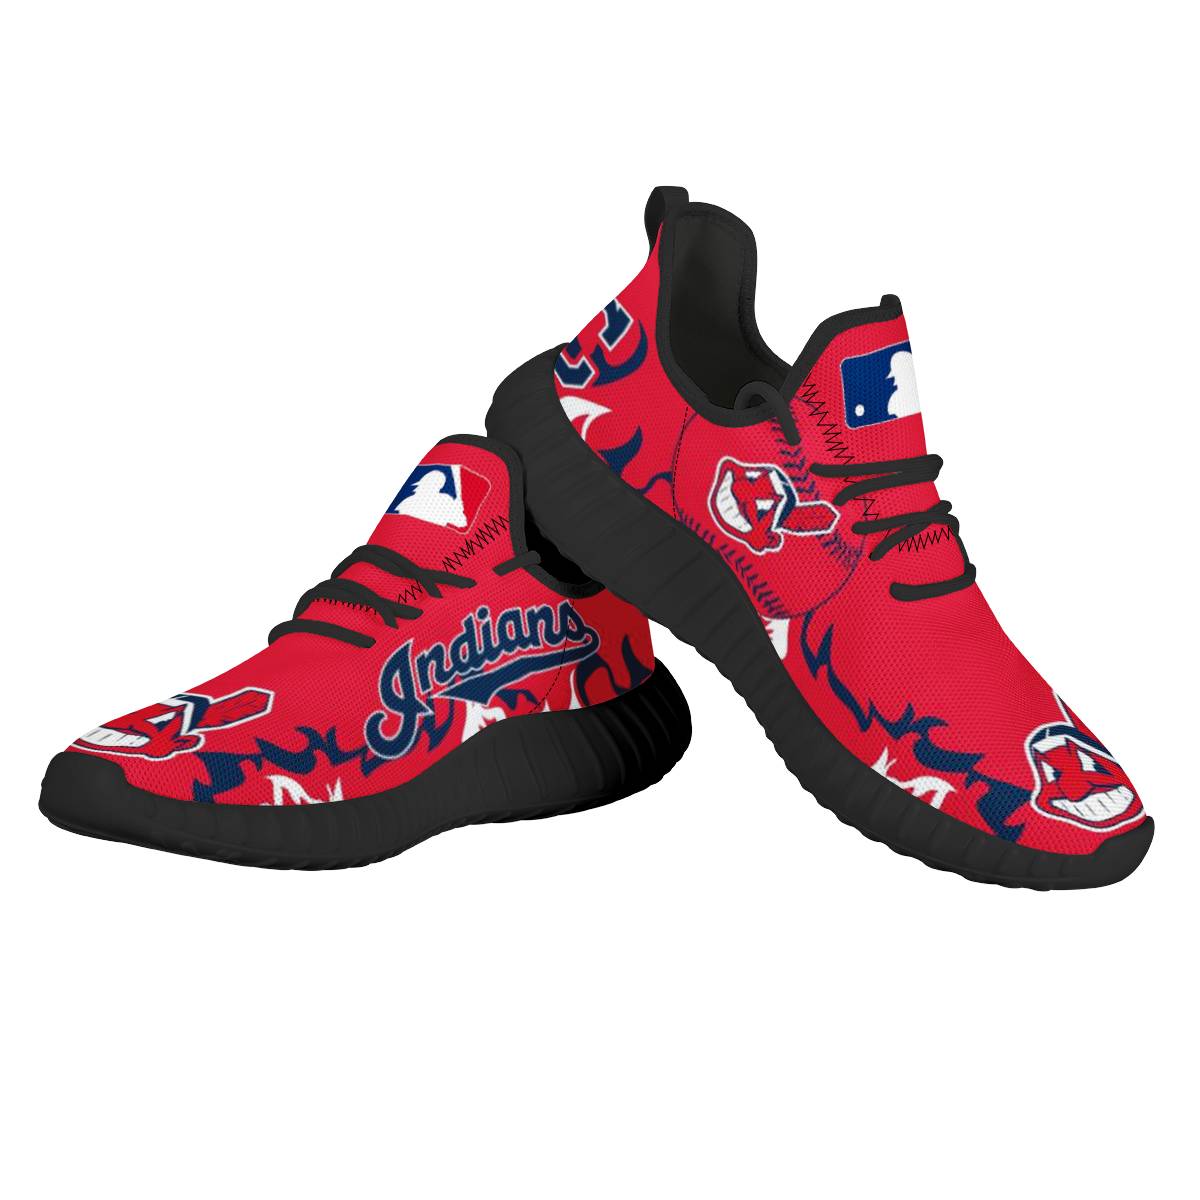 Women's Cleveland Indians Mesh Knit Sneakers/Shoes 001